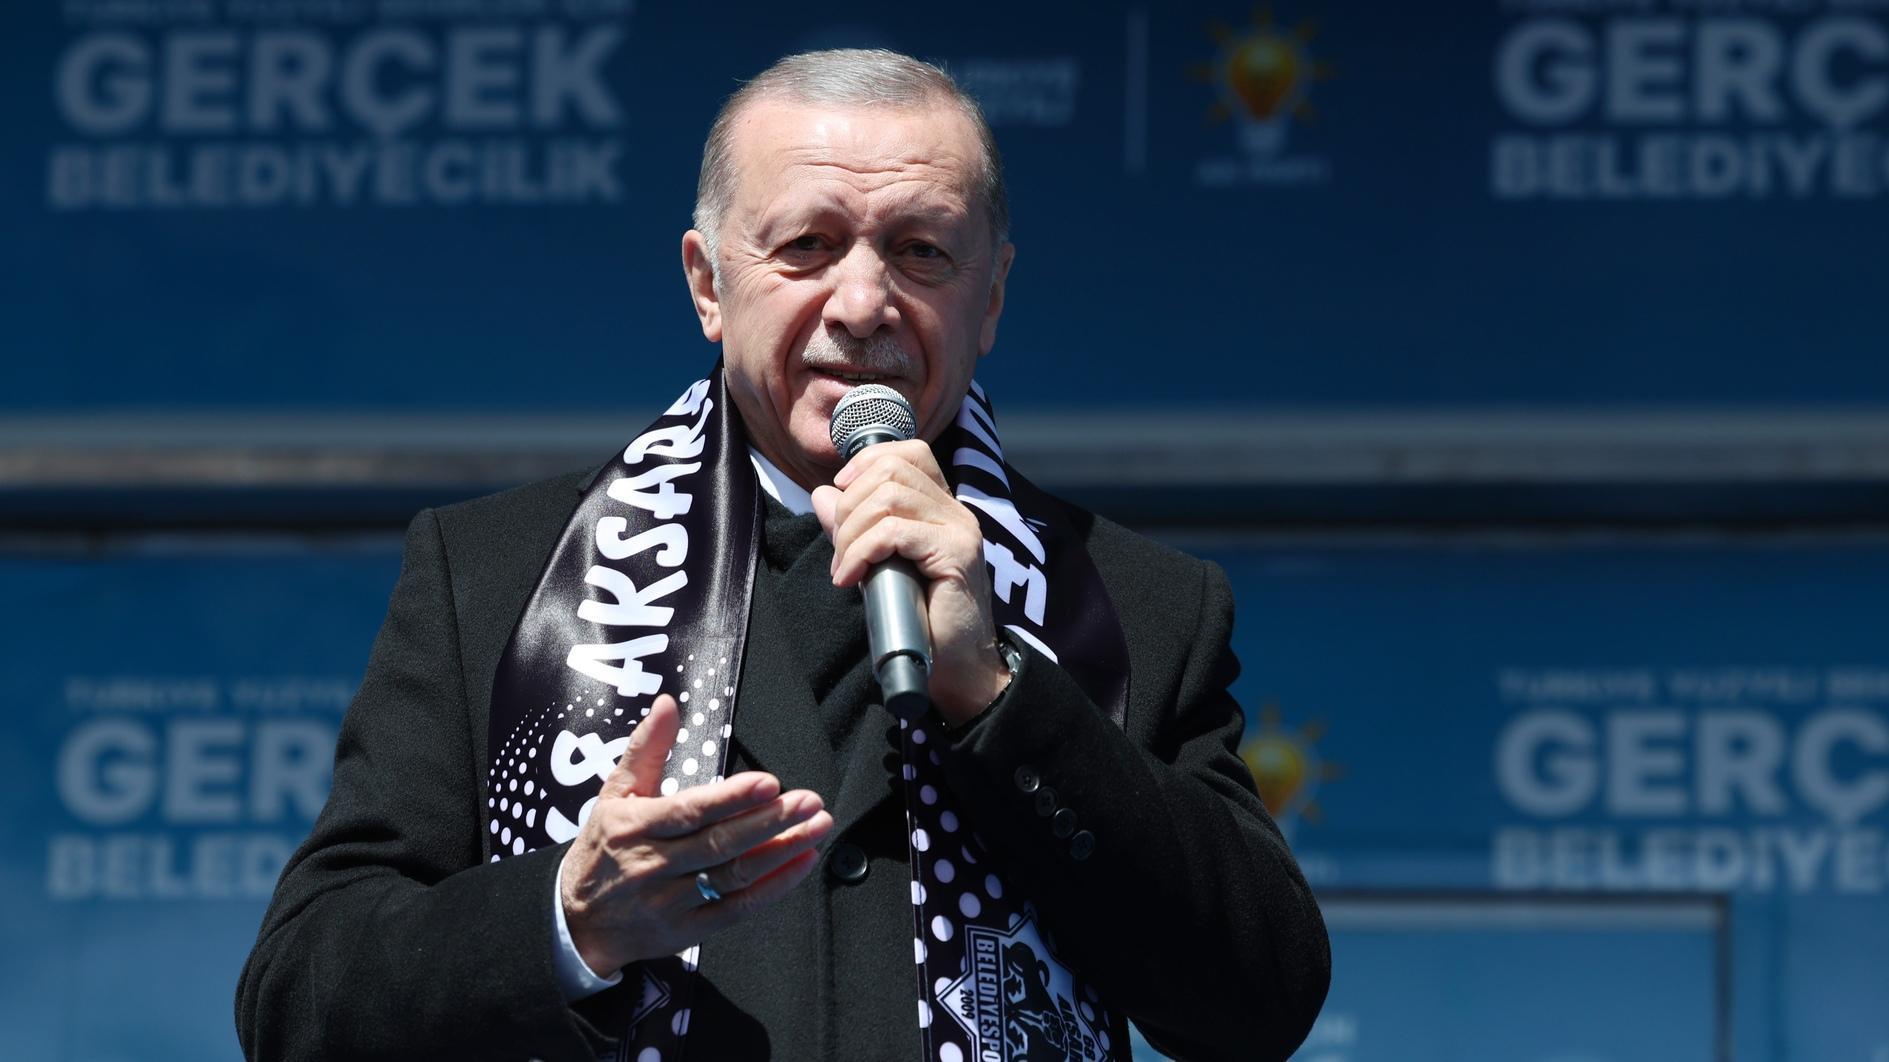 Erdoğan criticizes global inaction amid rising tensions